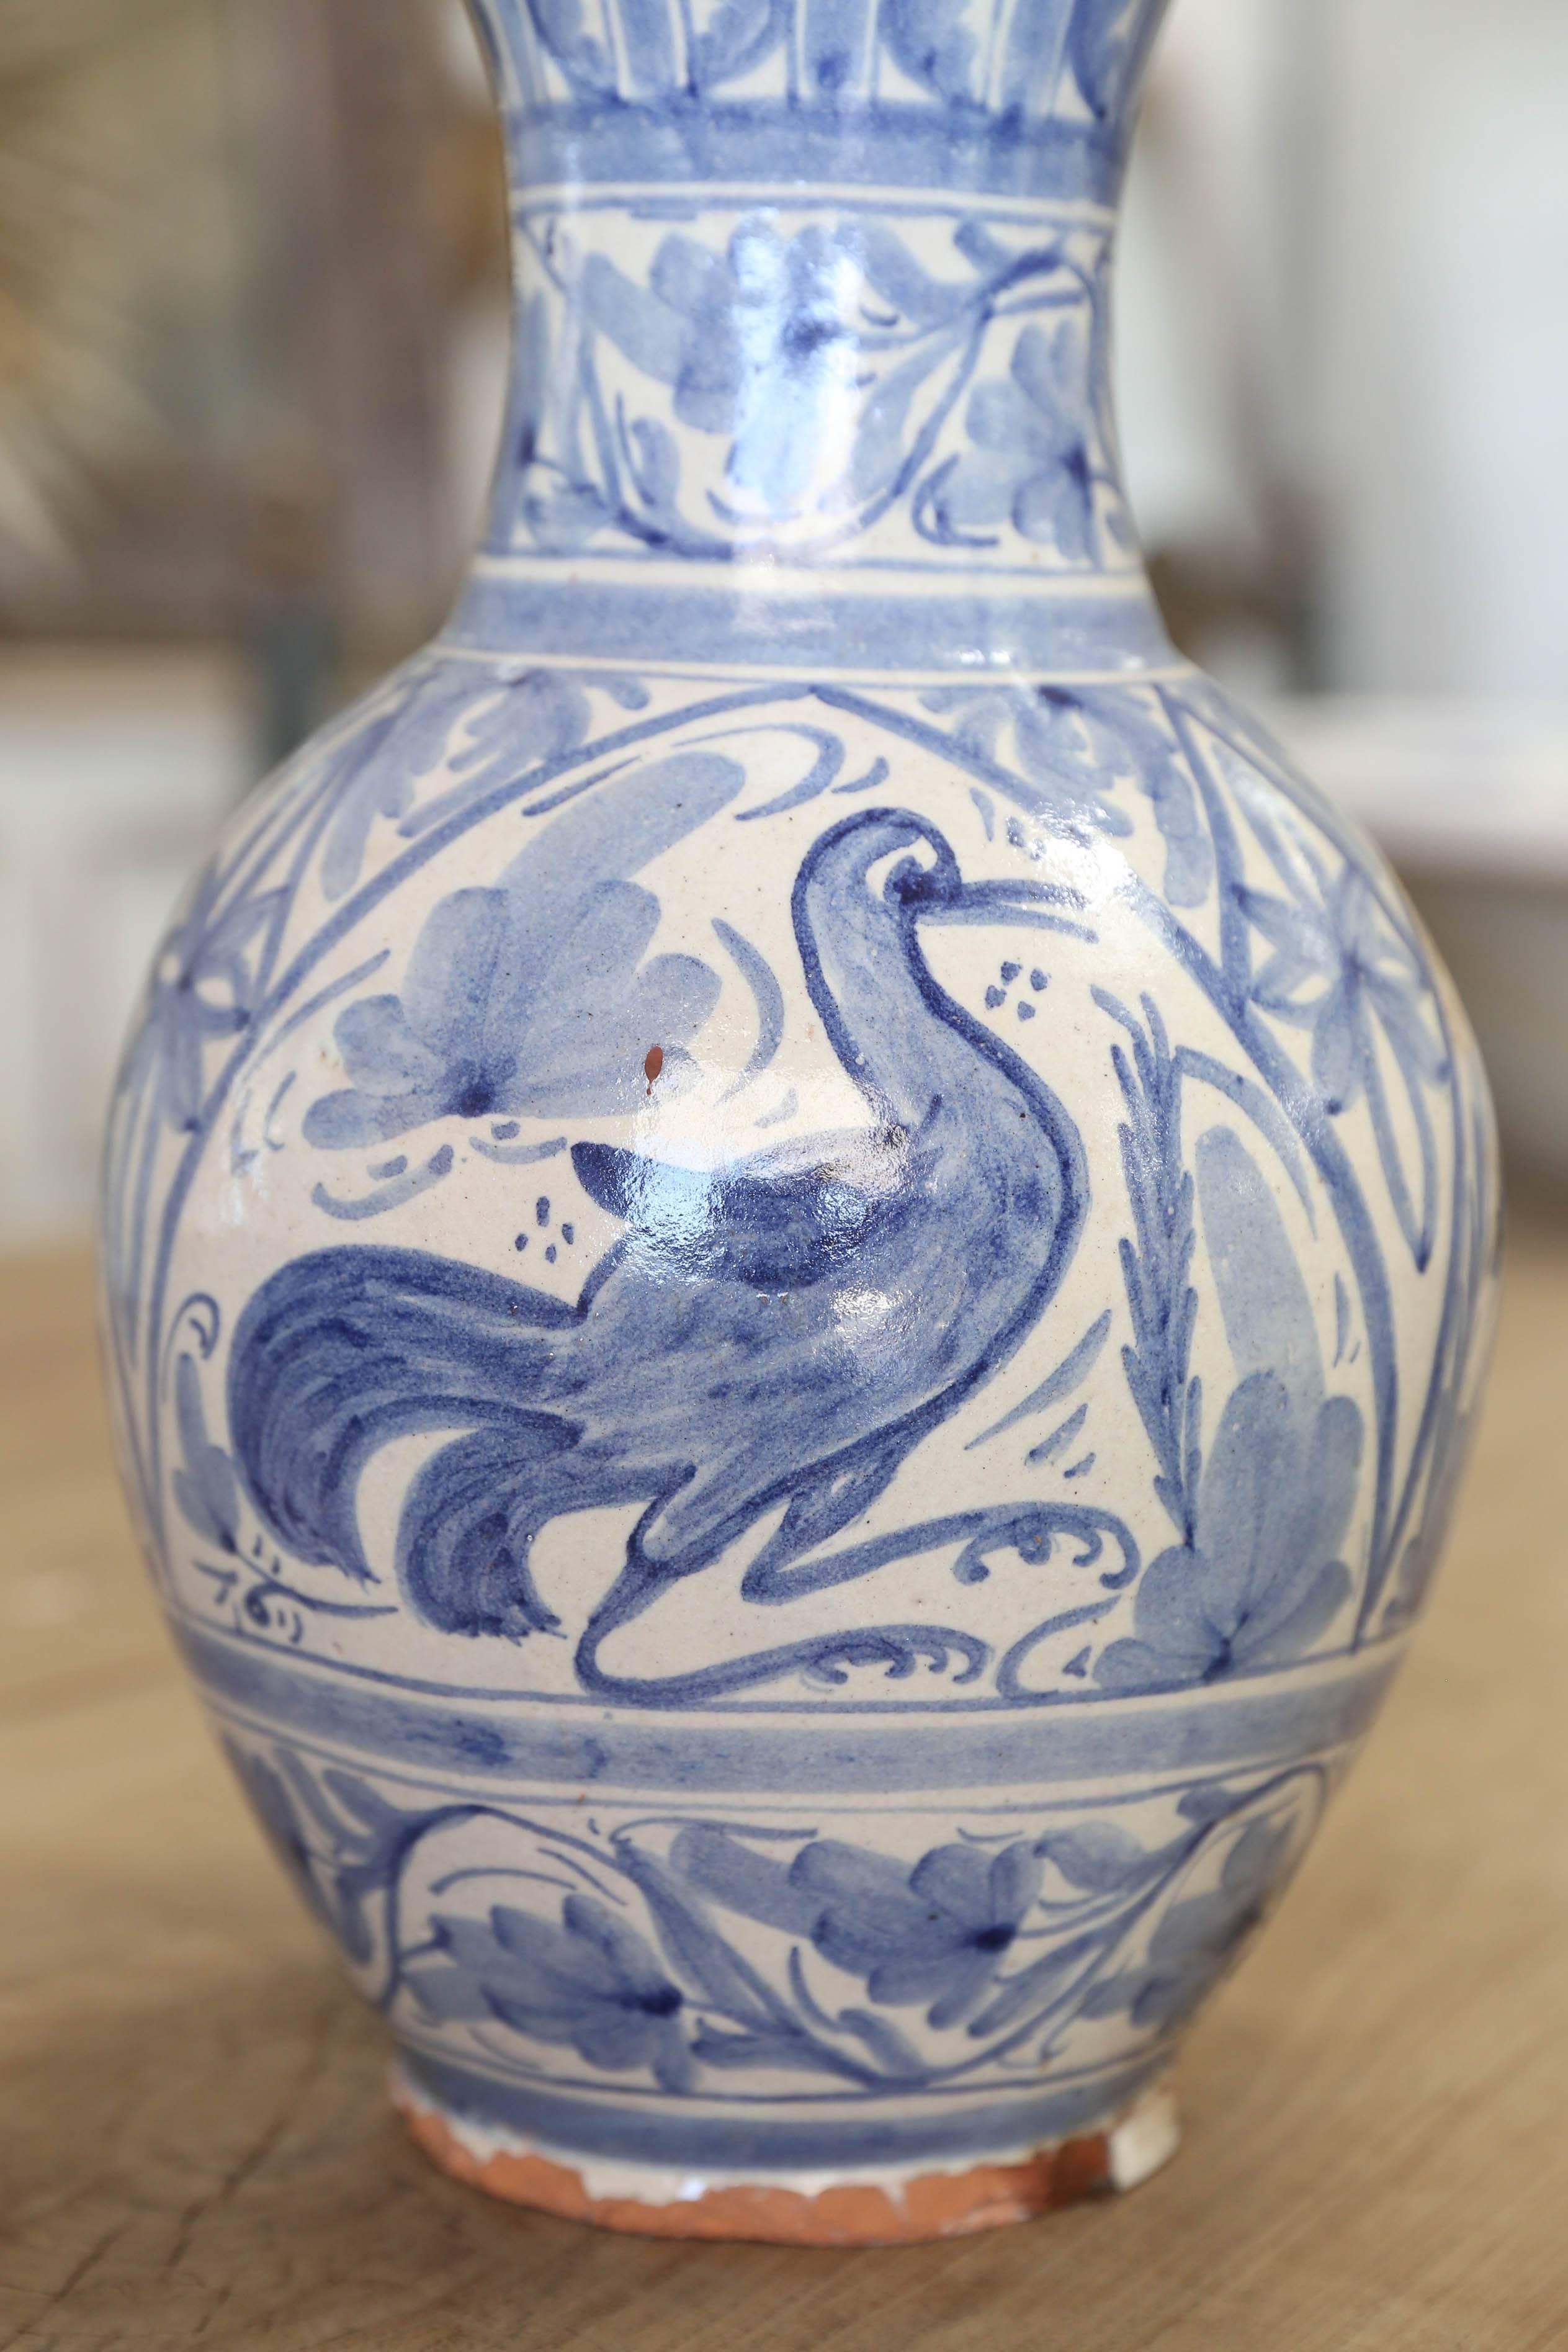 Spanish ceramic blue and white vase by Domingo Punter. Punter, a 5th generation pottery artist from Teruel, Spain. His style is of the Spanish Romanic from the 16th century.